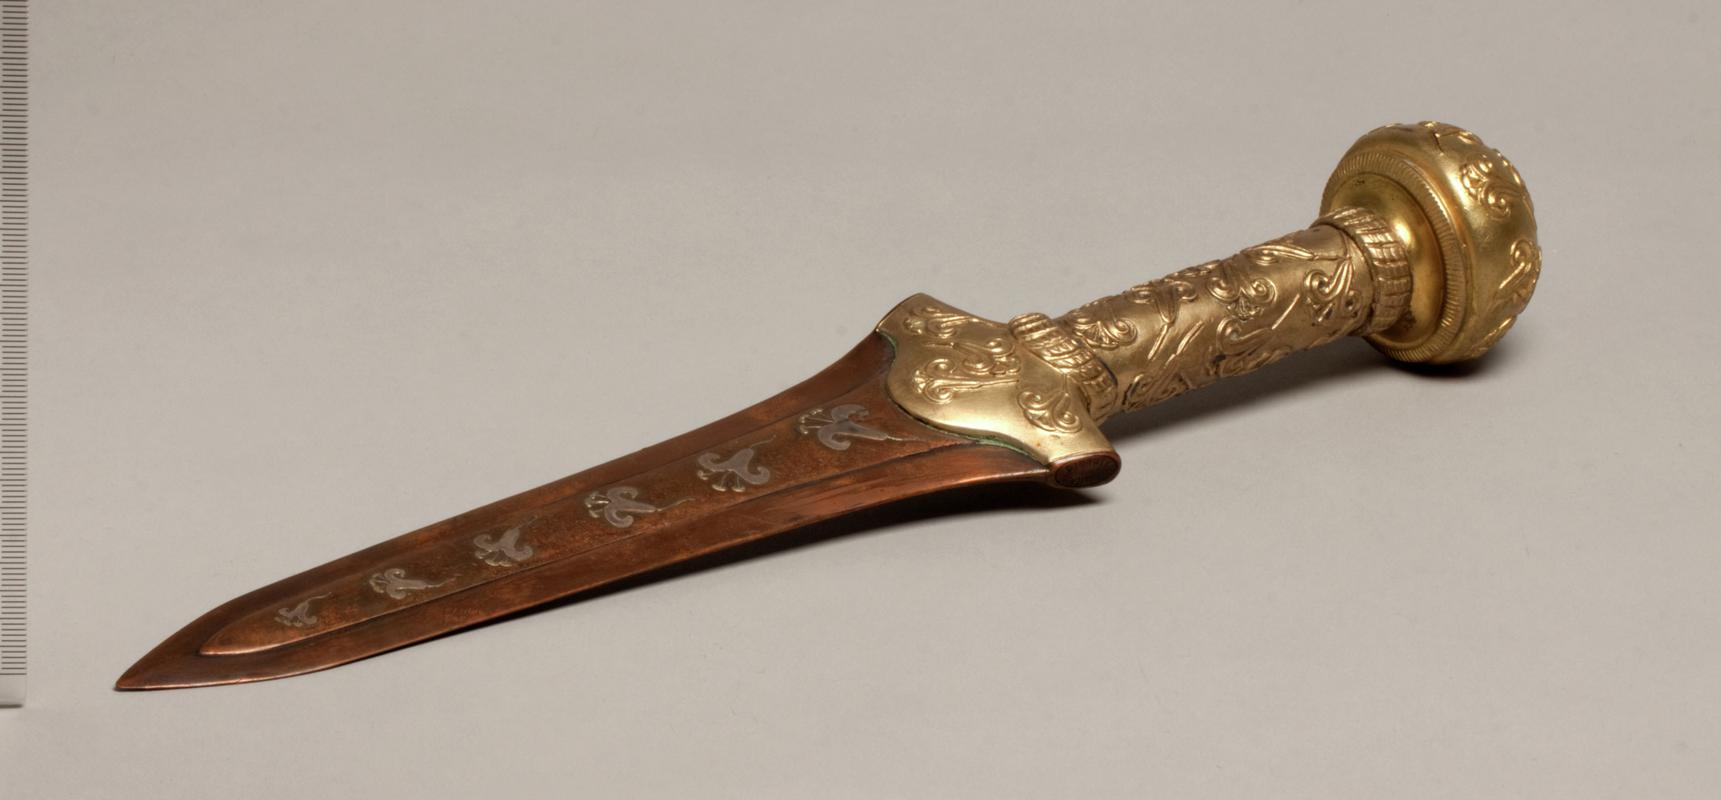 Replica Bronze Age dagger with gold handle and lillies